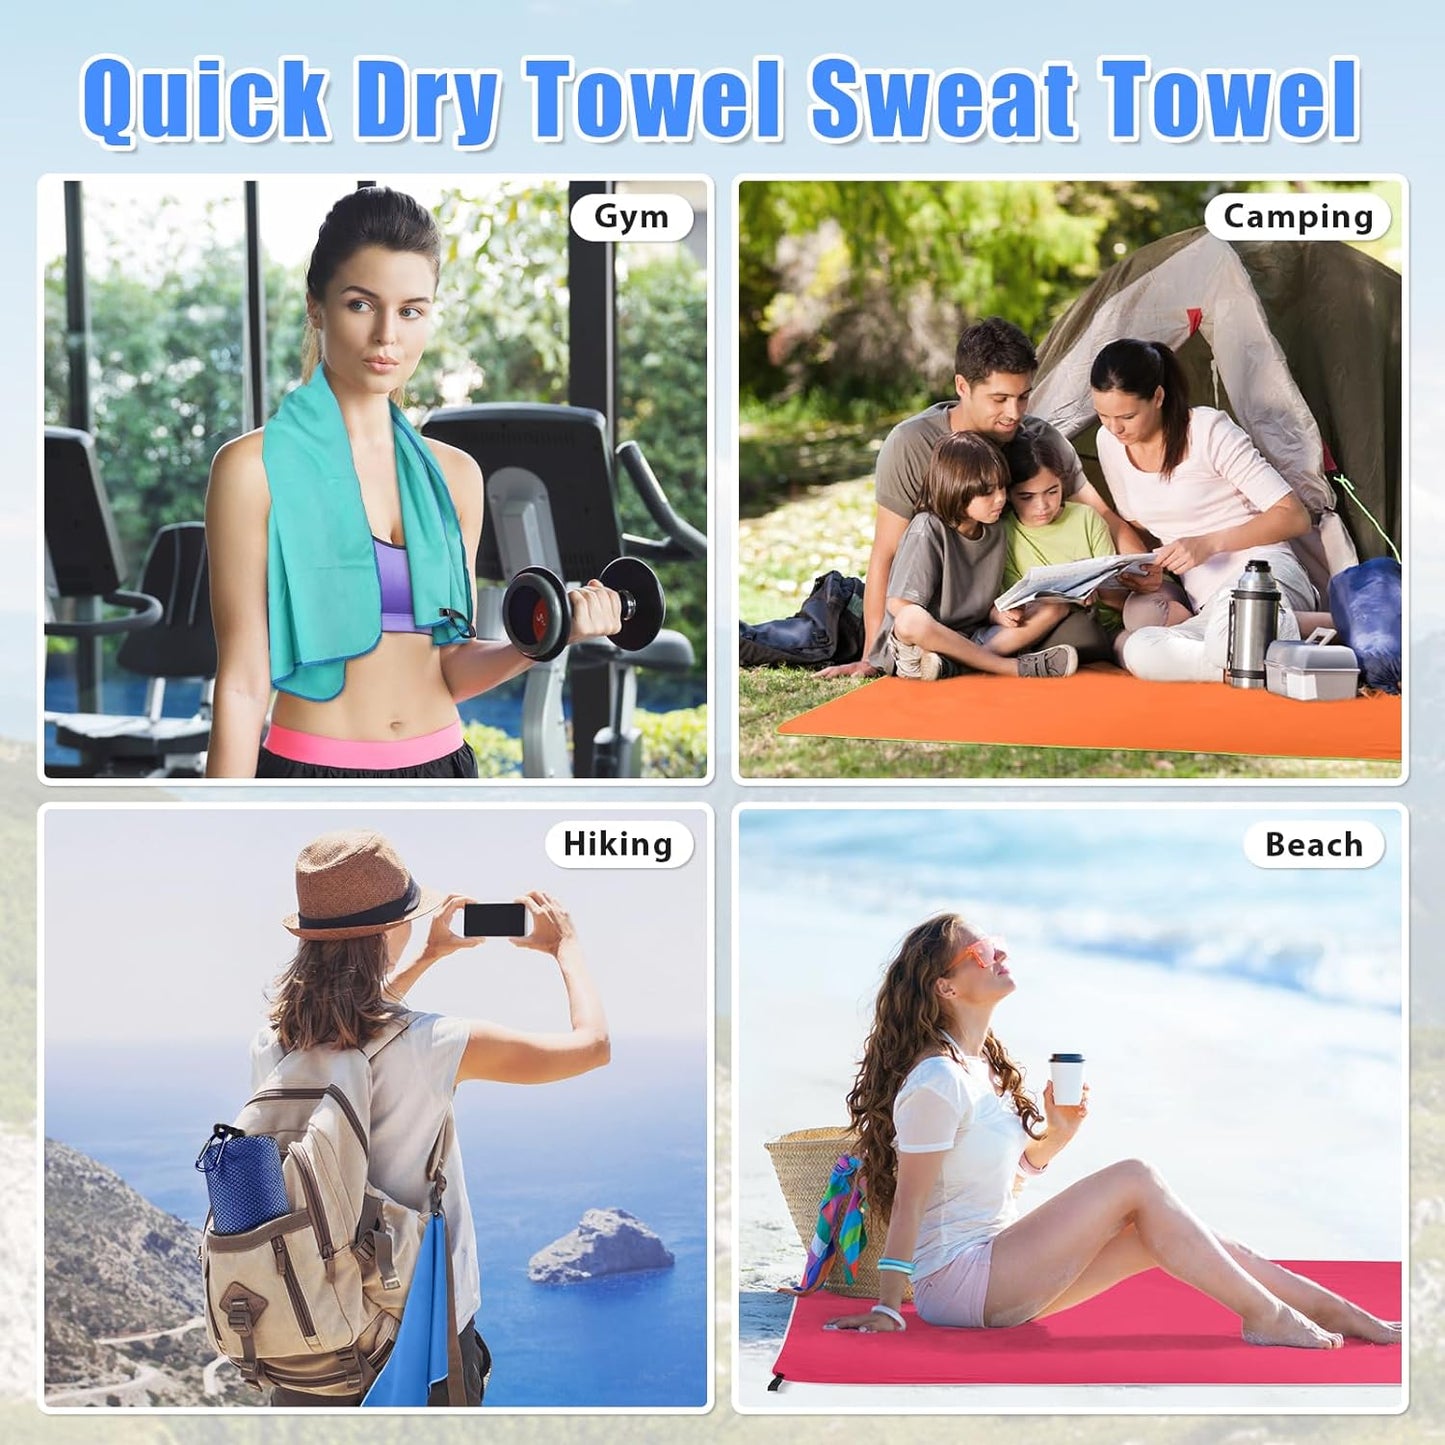 2 Pack Microfiber Travel Towel, Quick Dry Towel Camping Towel Beach Towels, Super Absorbent Compact Lightweight Sport Towel Gym Towel for Travel, Beach, Hiking, Gym, Pool, Bath, Yoga, Backpacking